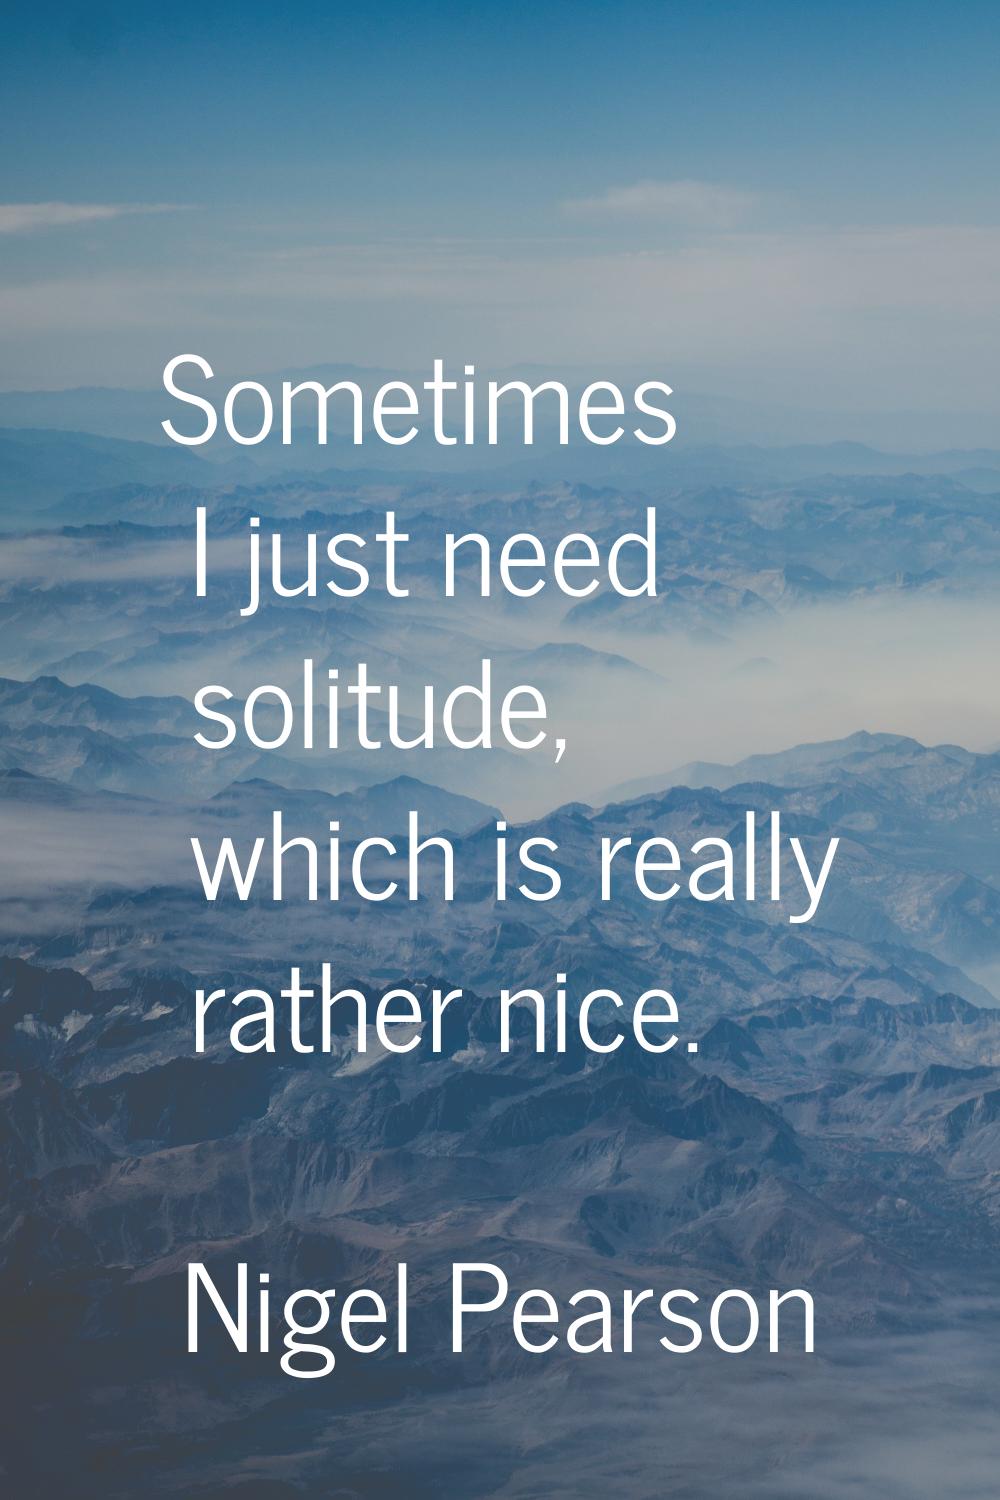 Sometimes I just need solitude, which is really rather nice.